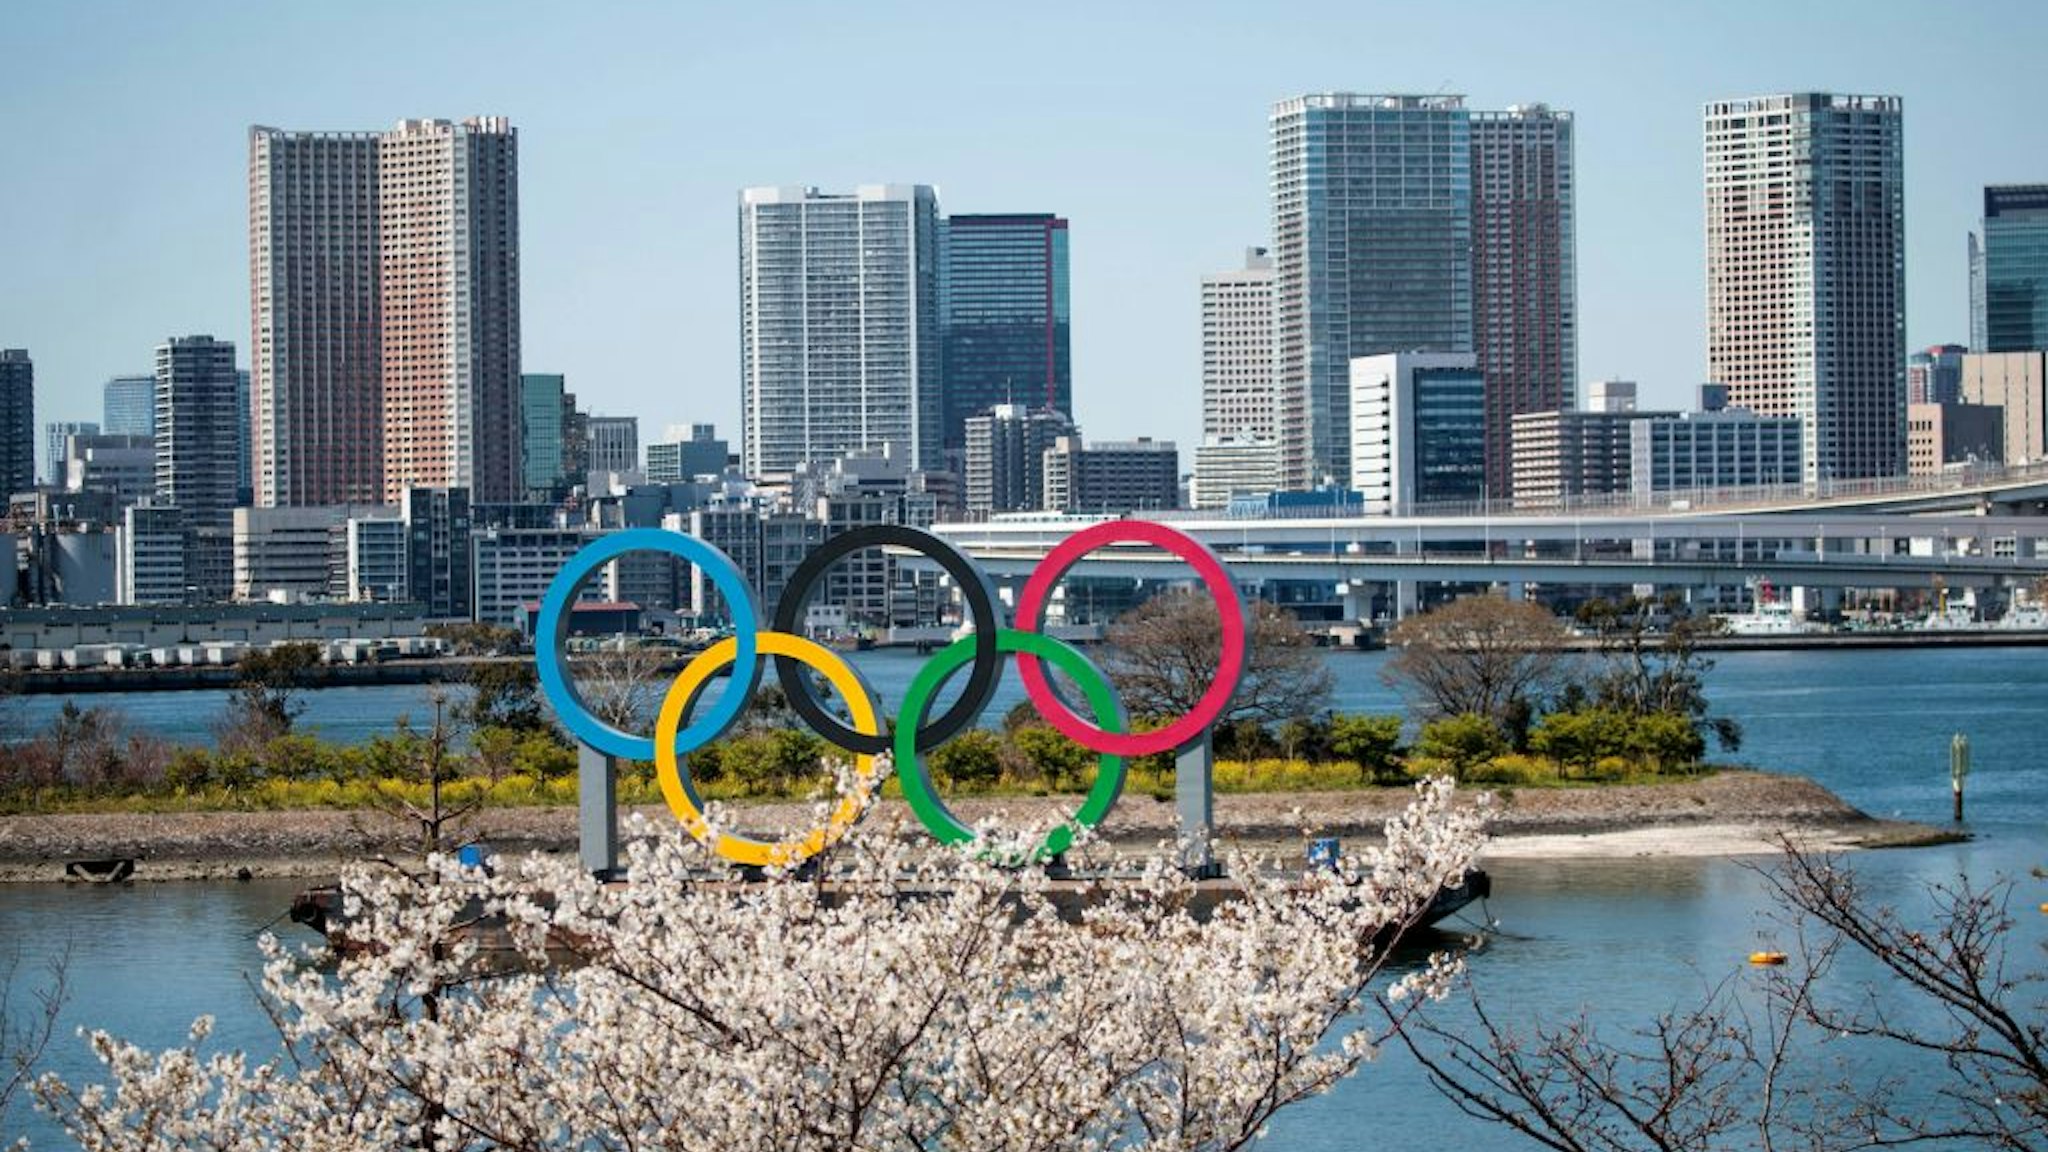 Cherry blossoms are seen near the Olympic rings in Tokyo's Odaiba district on March 25, 2020, the day after the historic decision to postpone the 2020 Tokyo Olympic Games. - Japan on March 25 started the unprecedented task of reorganising the Tokyo Olympics after the historic decision to postpone the world's biggest sporting event due to the COVID-19 coronavirus pandemic that has locked down one third of the planet. (Photo by Behrouz MEHRI / AFP) (Photo by BEHROUZ MEHRI/AFP via Getty Images)